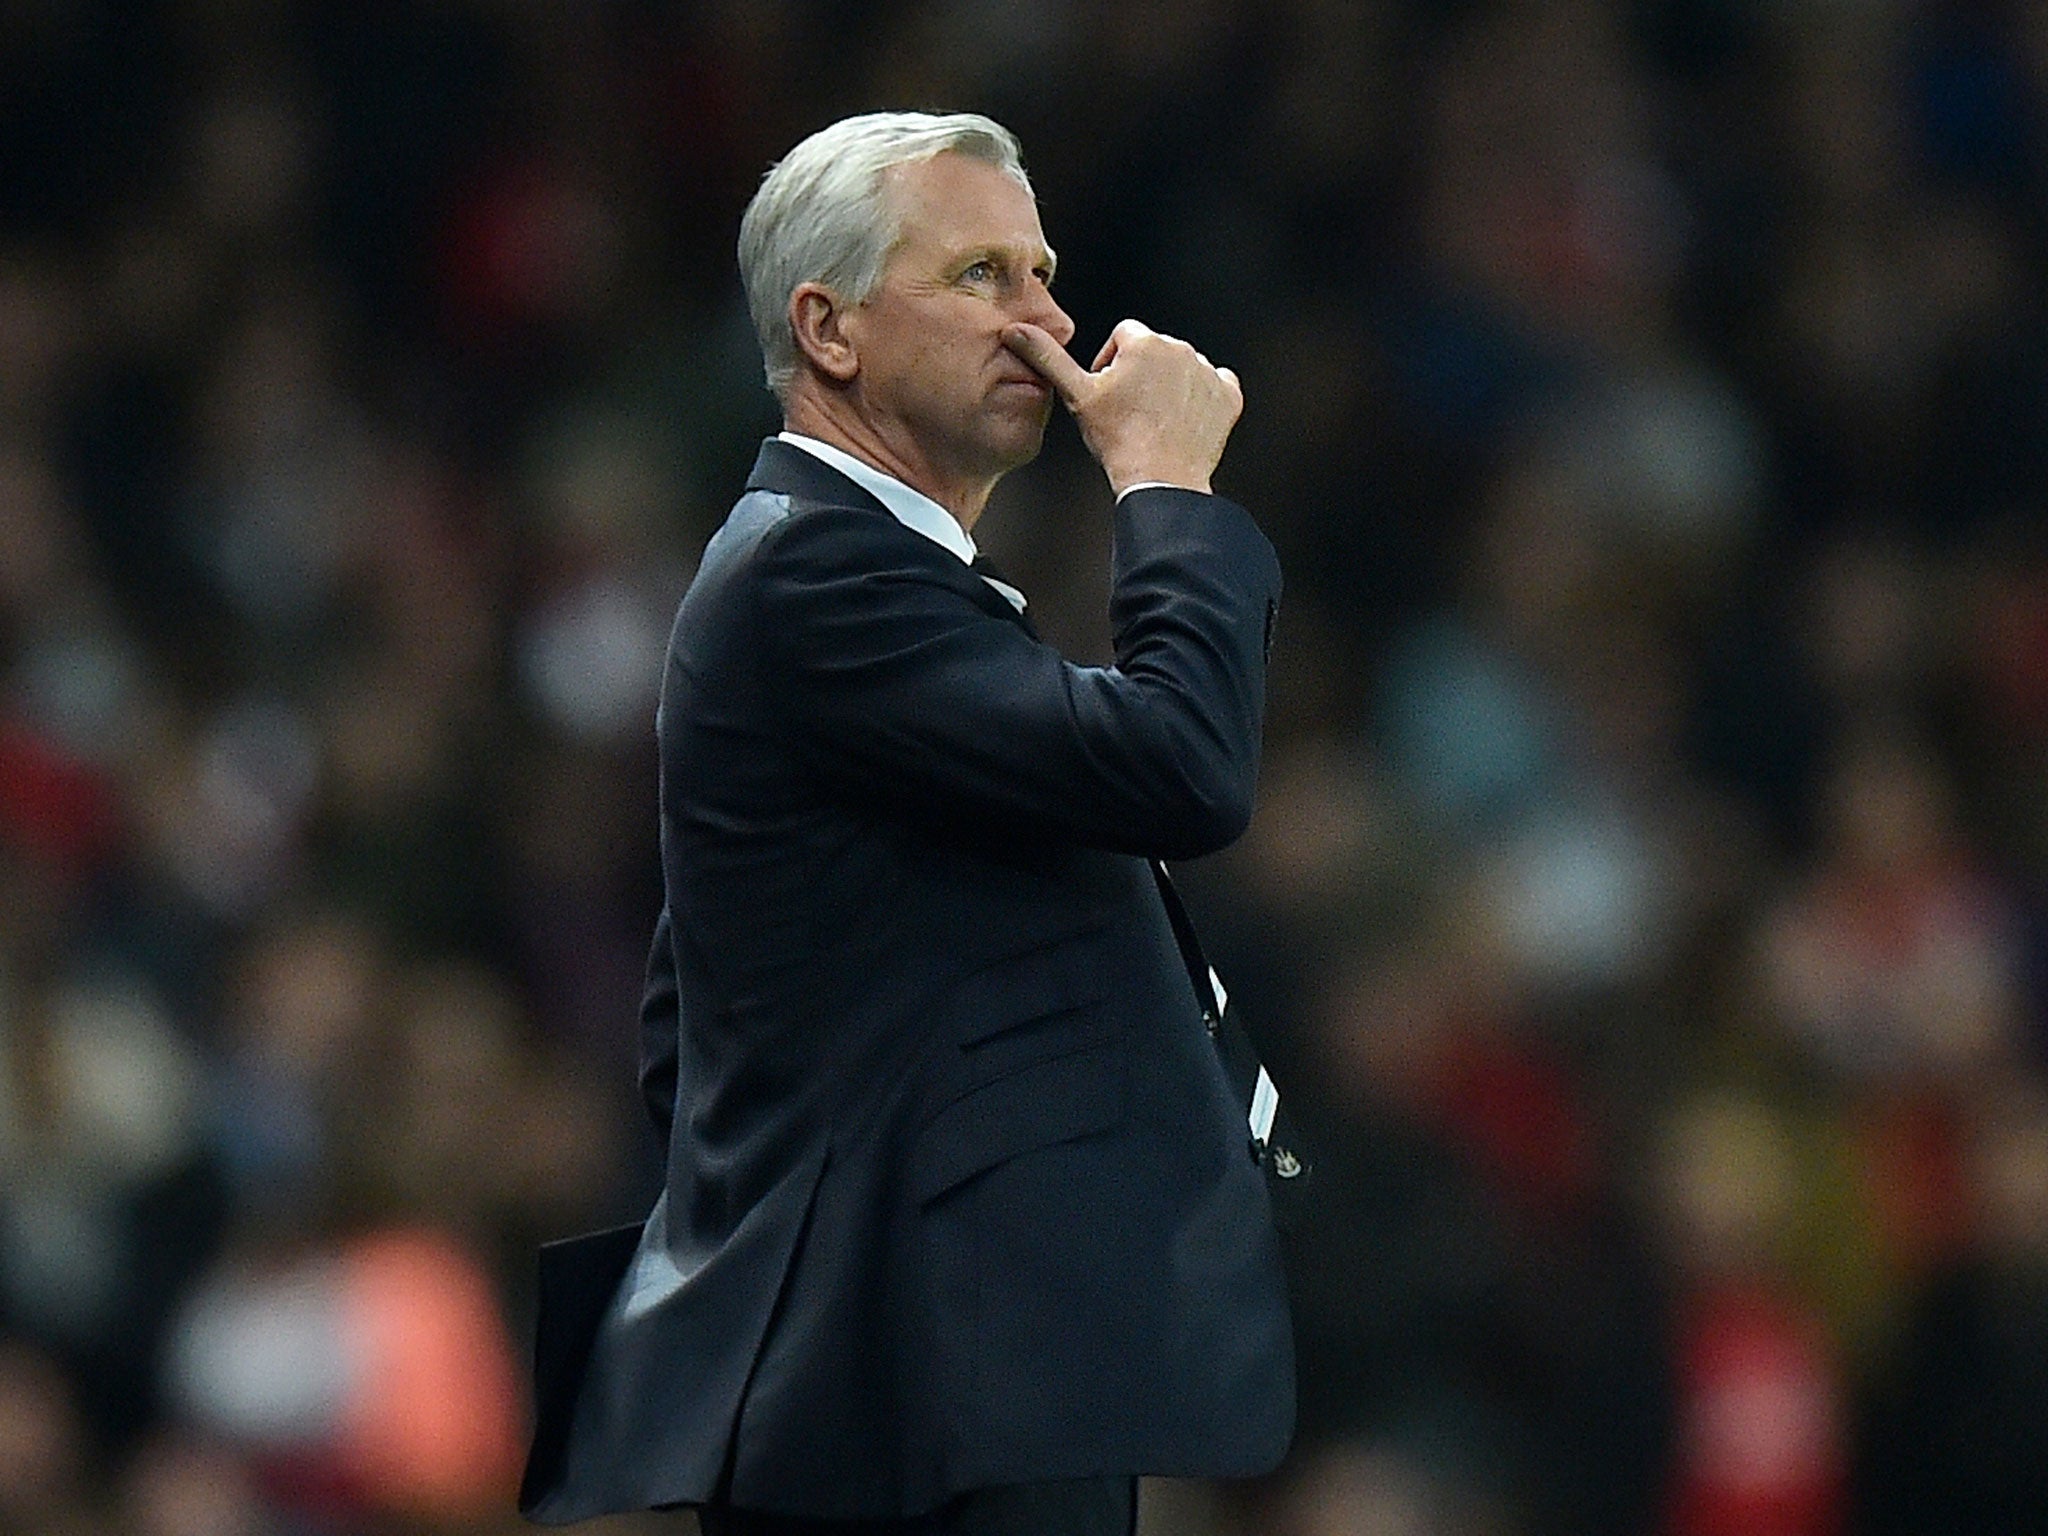 Alan Pardew returned to the touchline for the first time after a seven-match ban at the Emirates on Monday